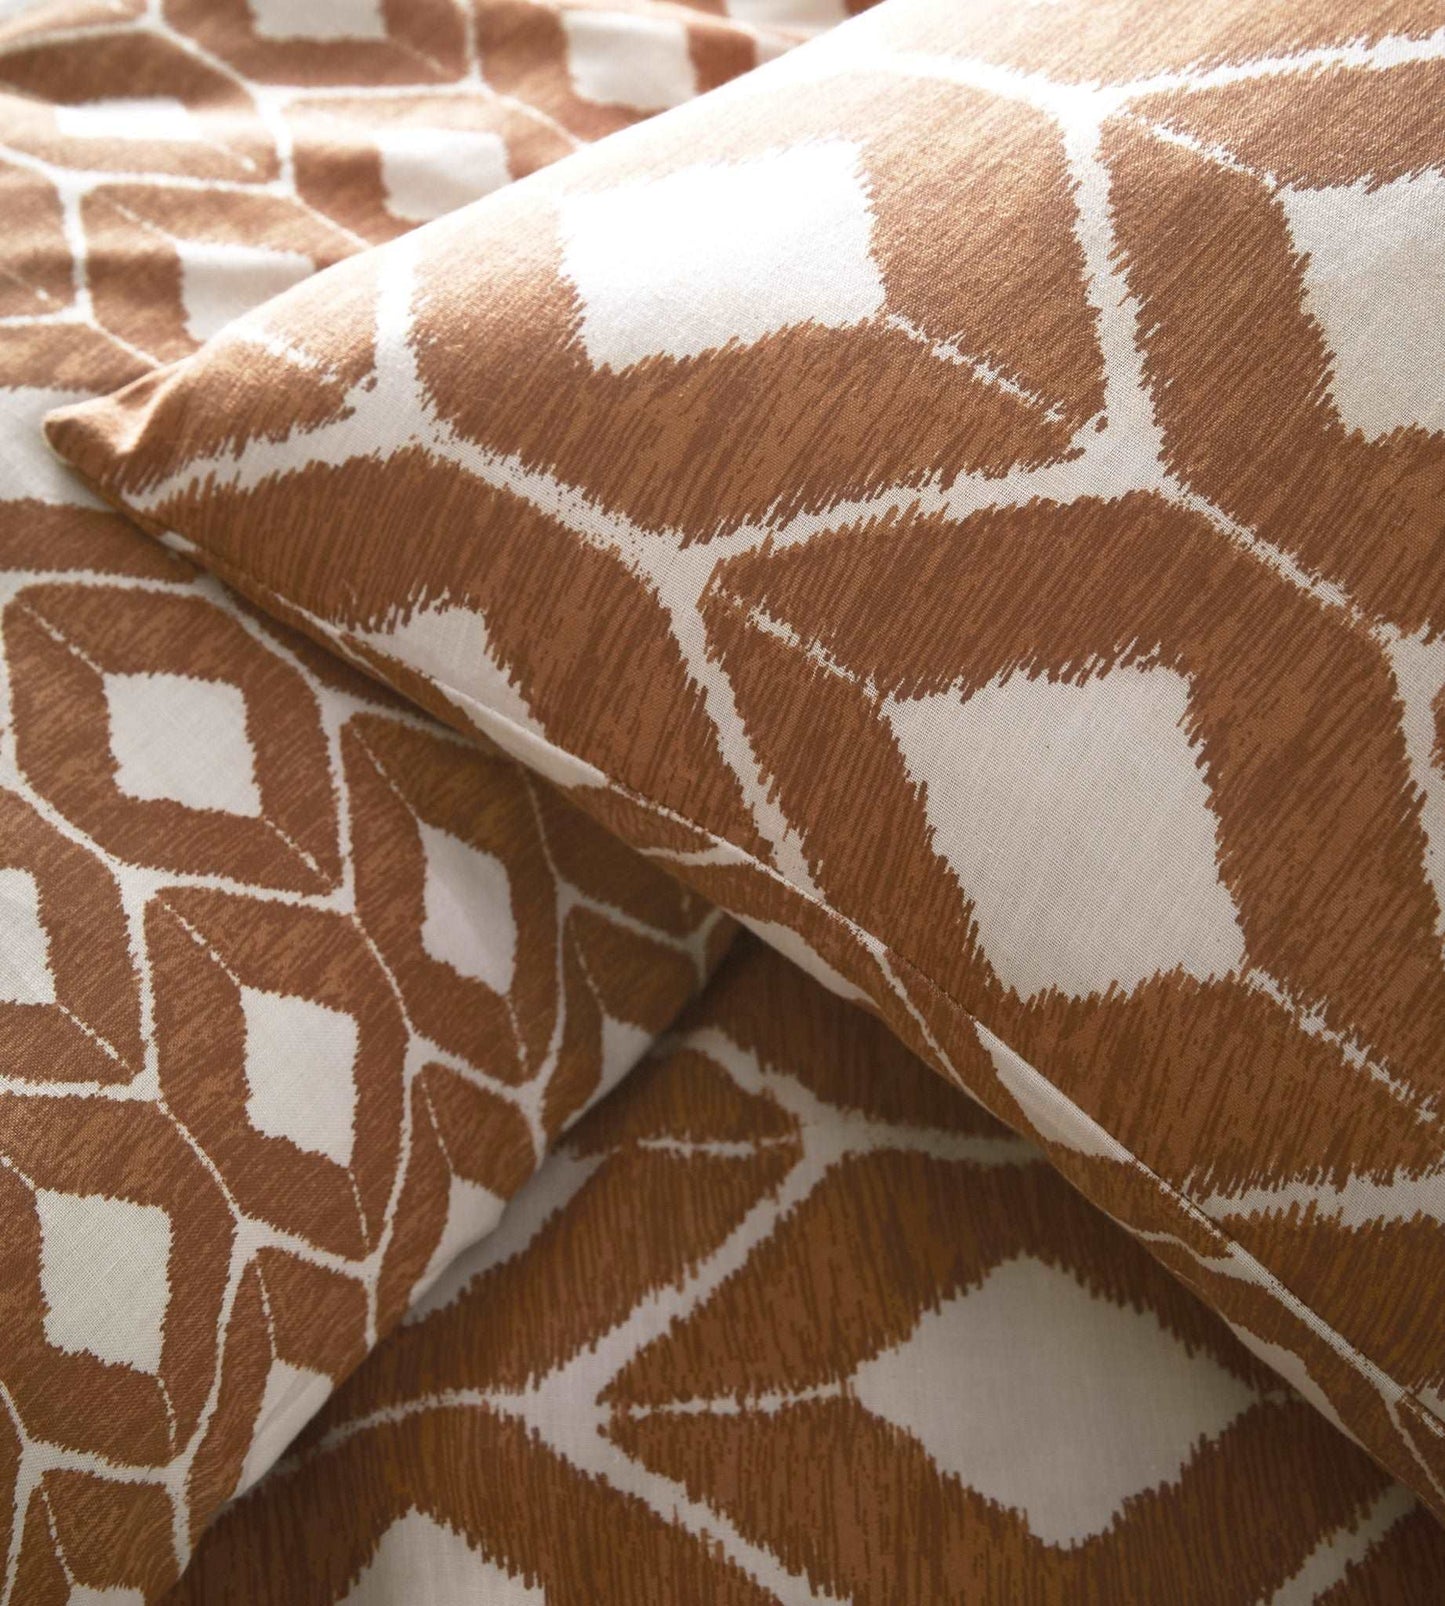 a warm and homely ethnic geometric print, inspired by tribal and native shapes and patterns